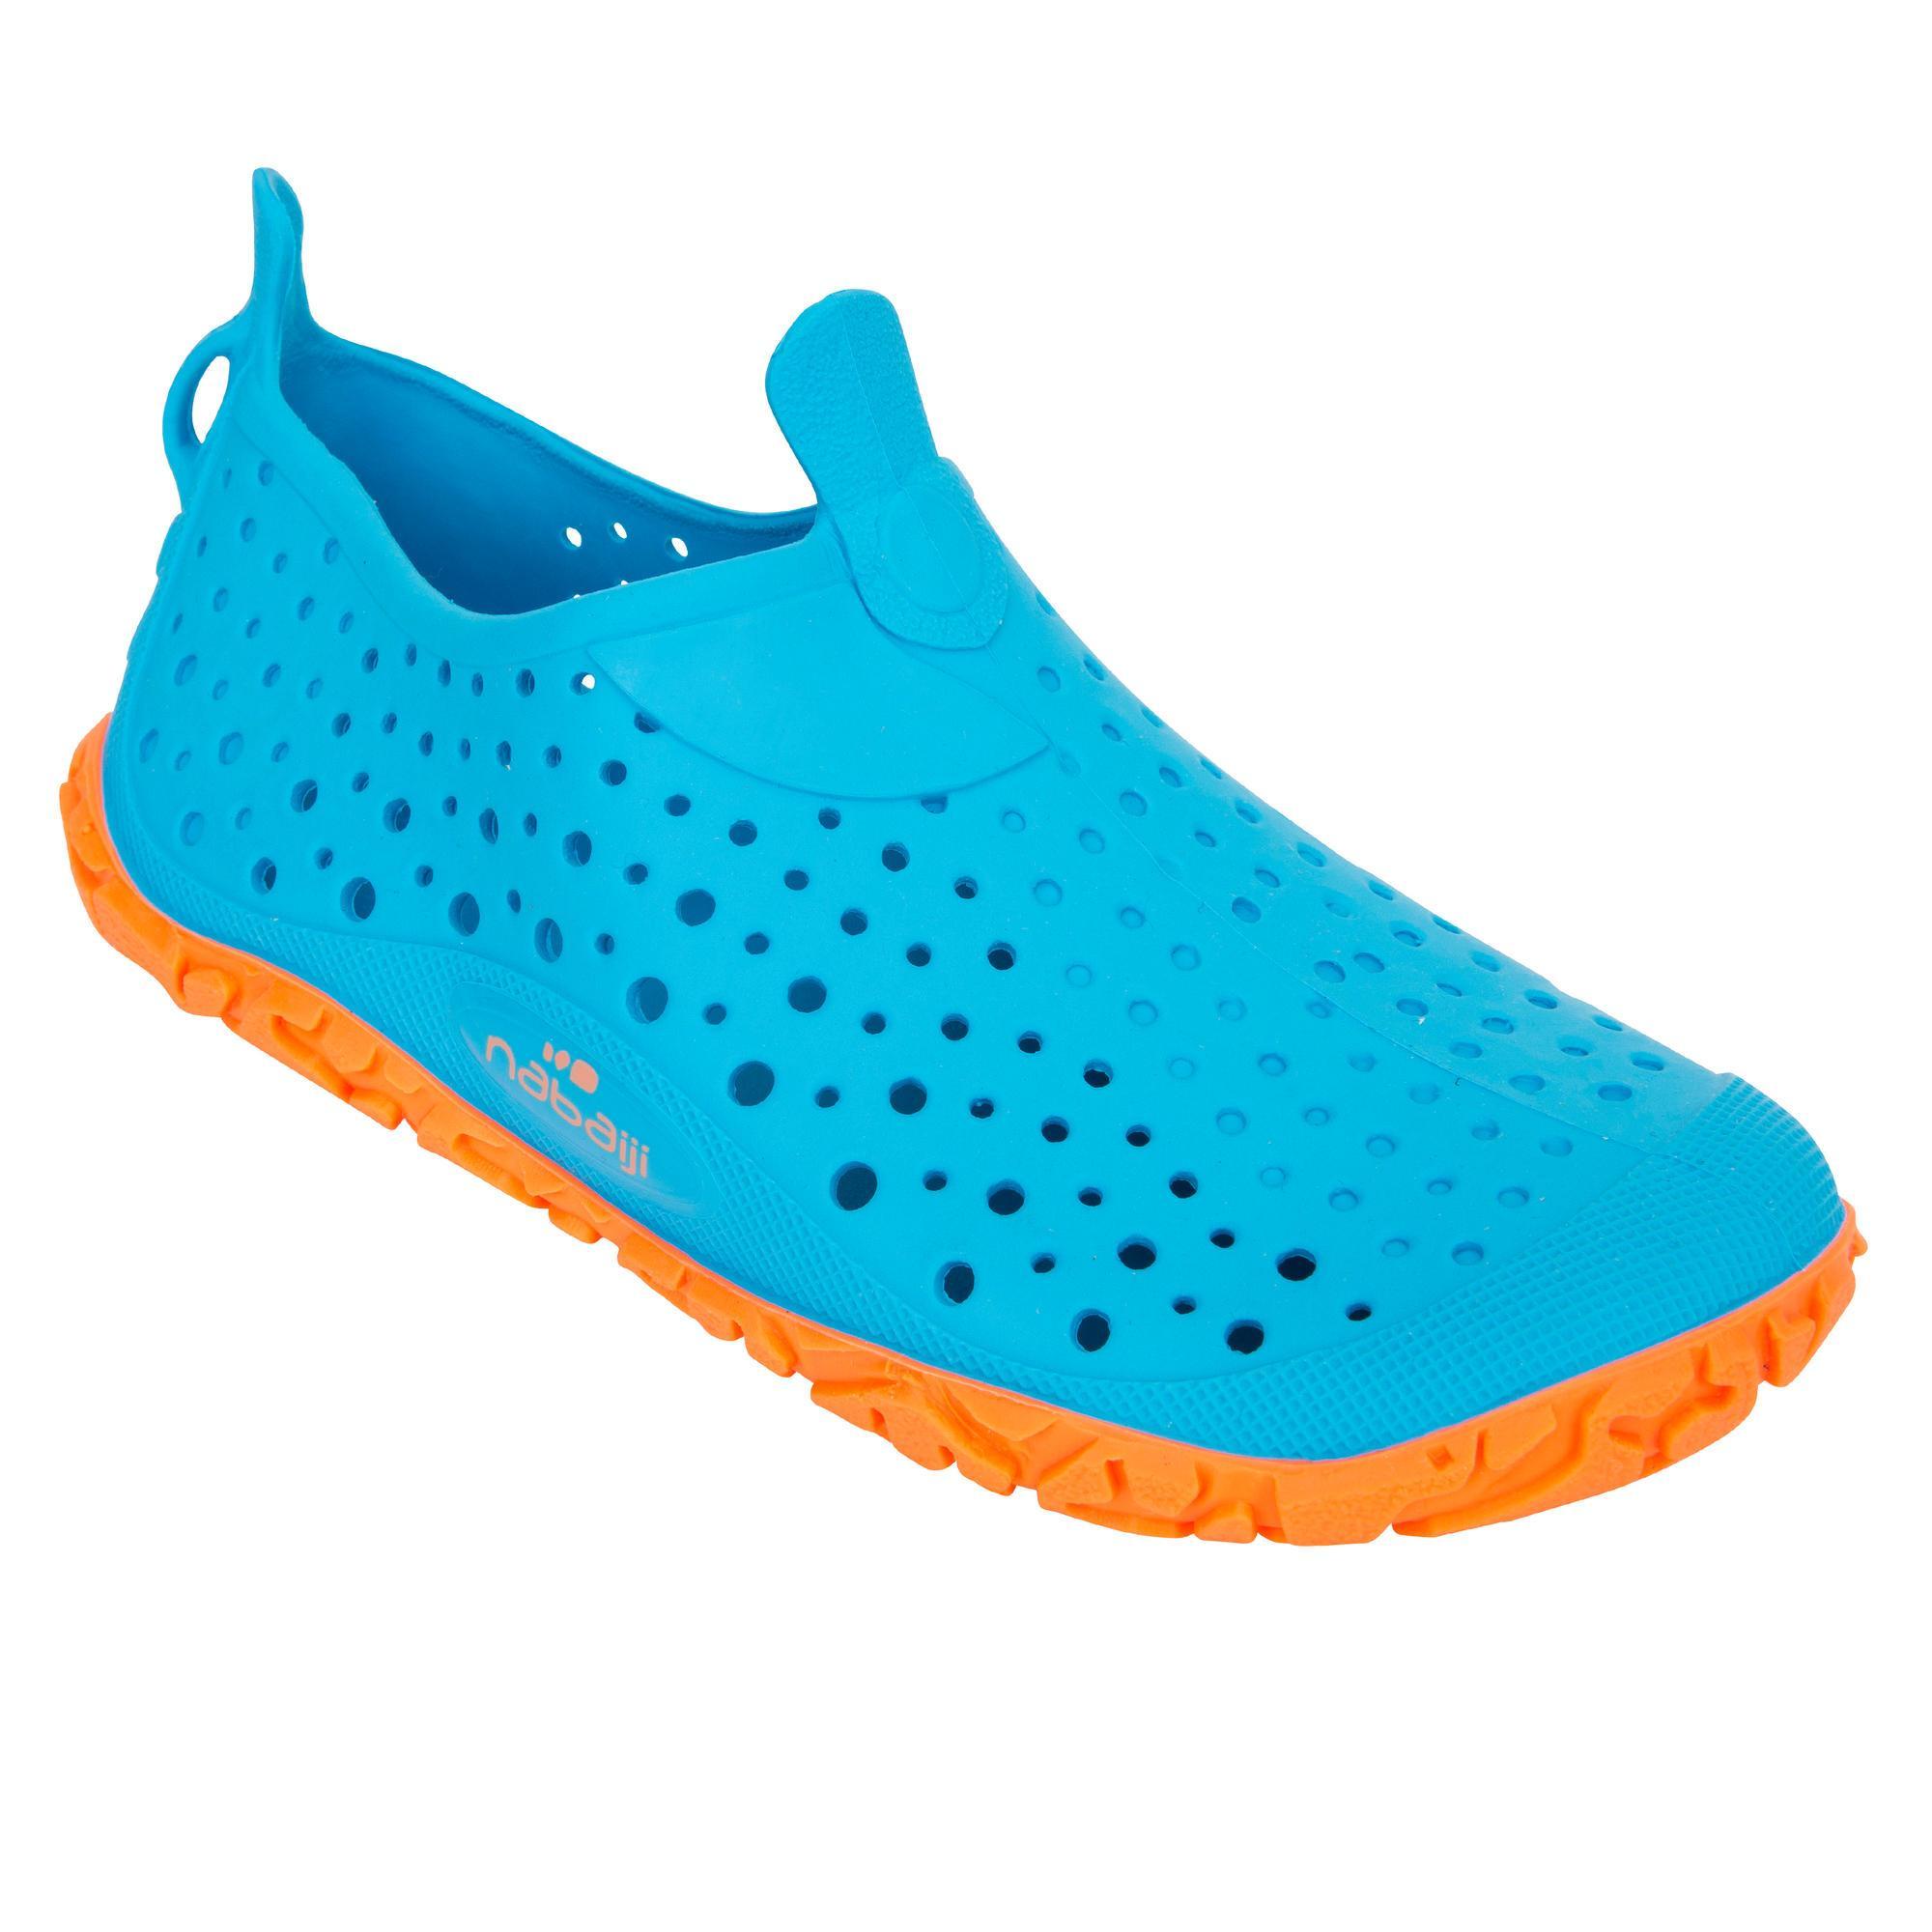 POOL SHOES PINK TURQUOISE - Decathlon